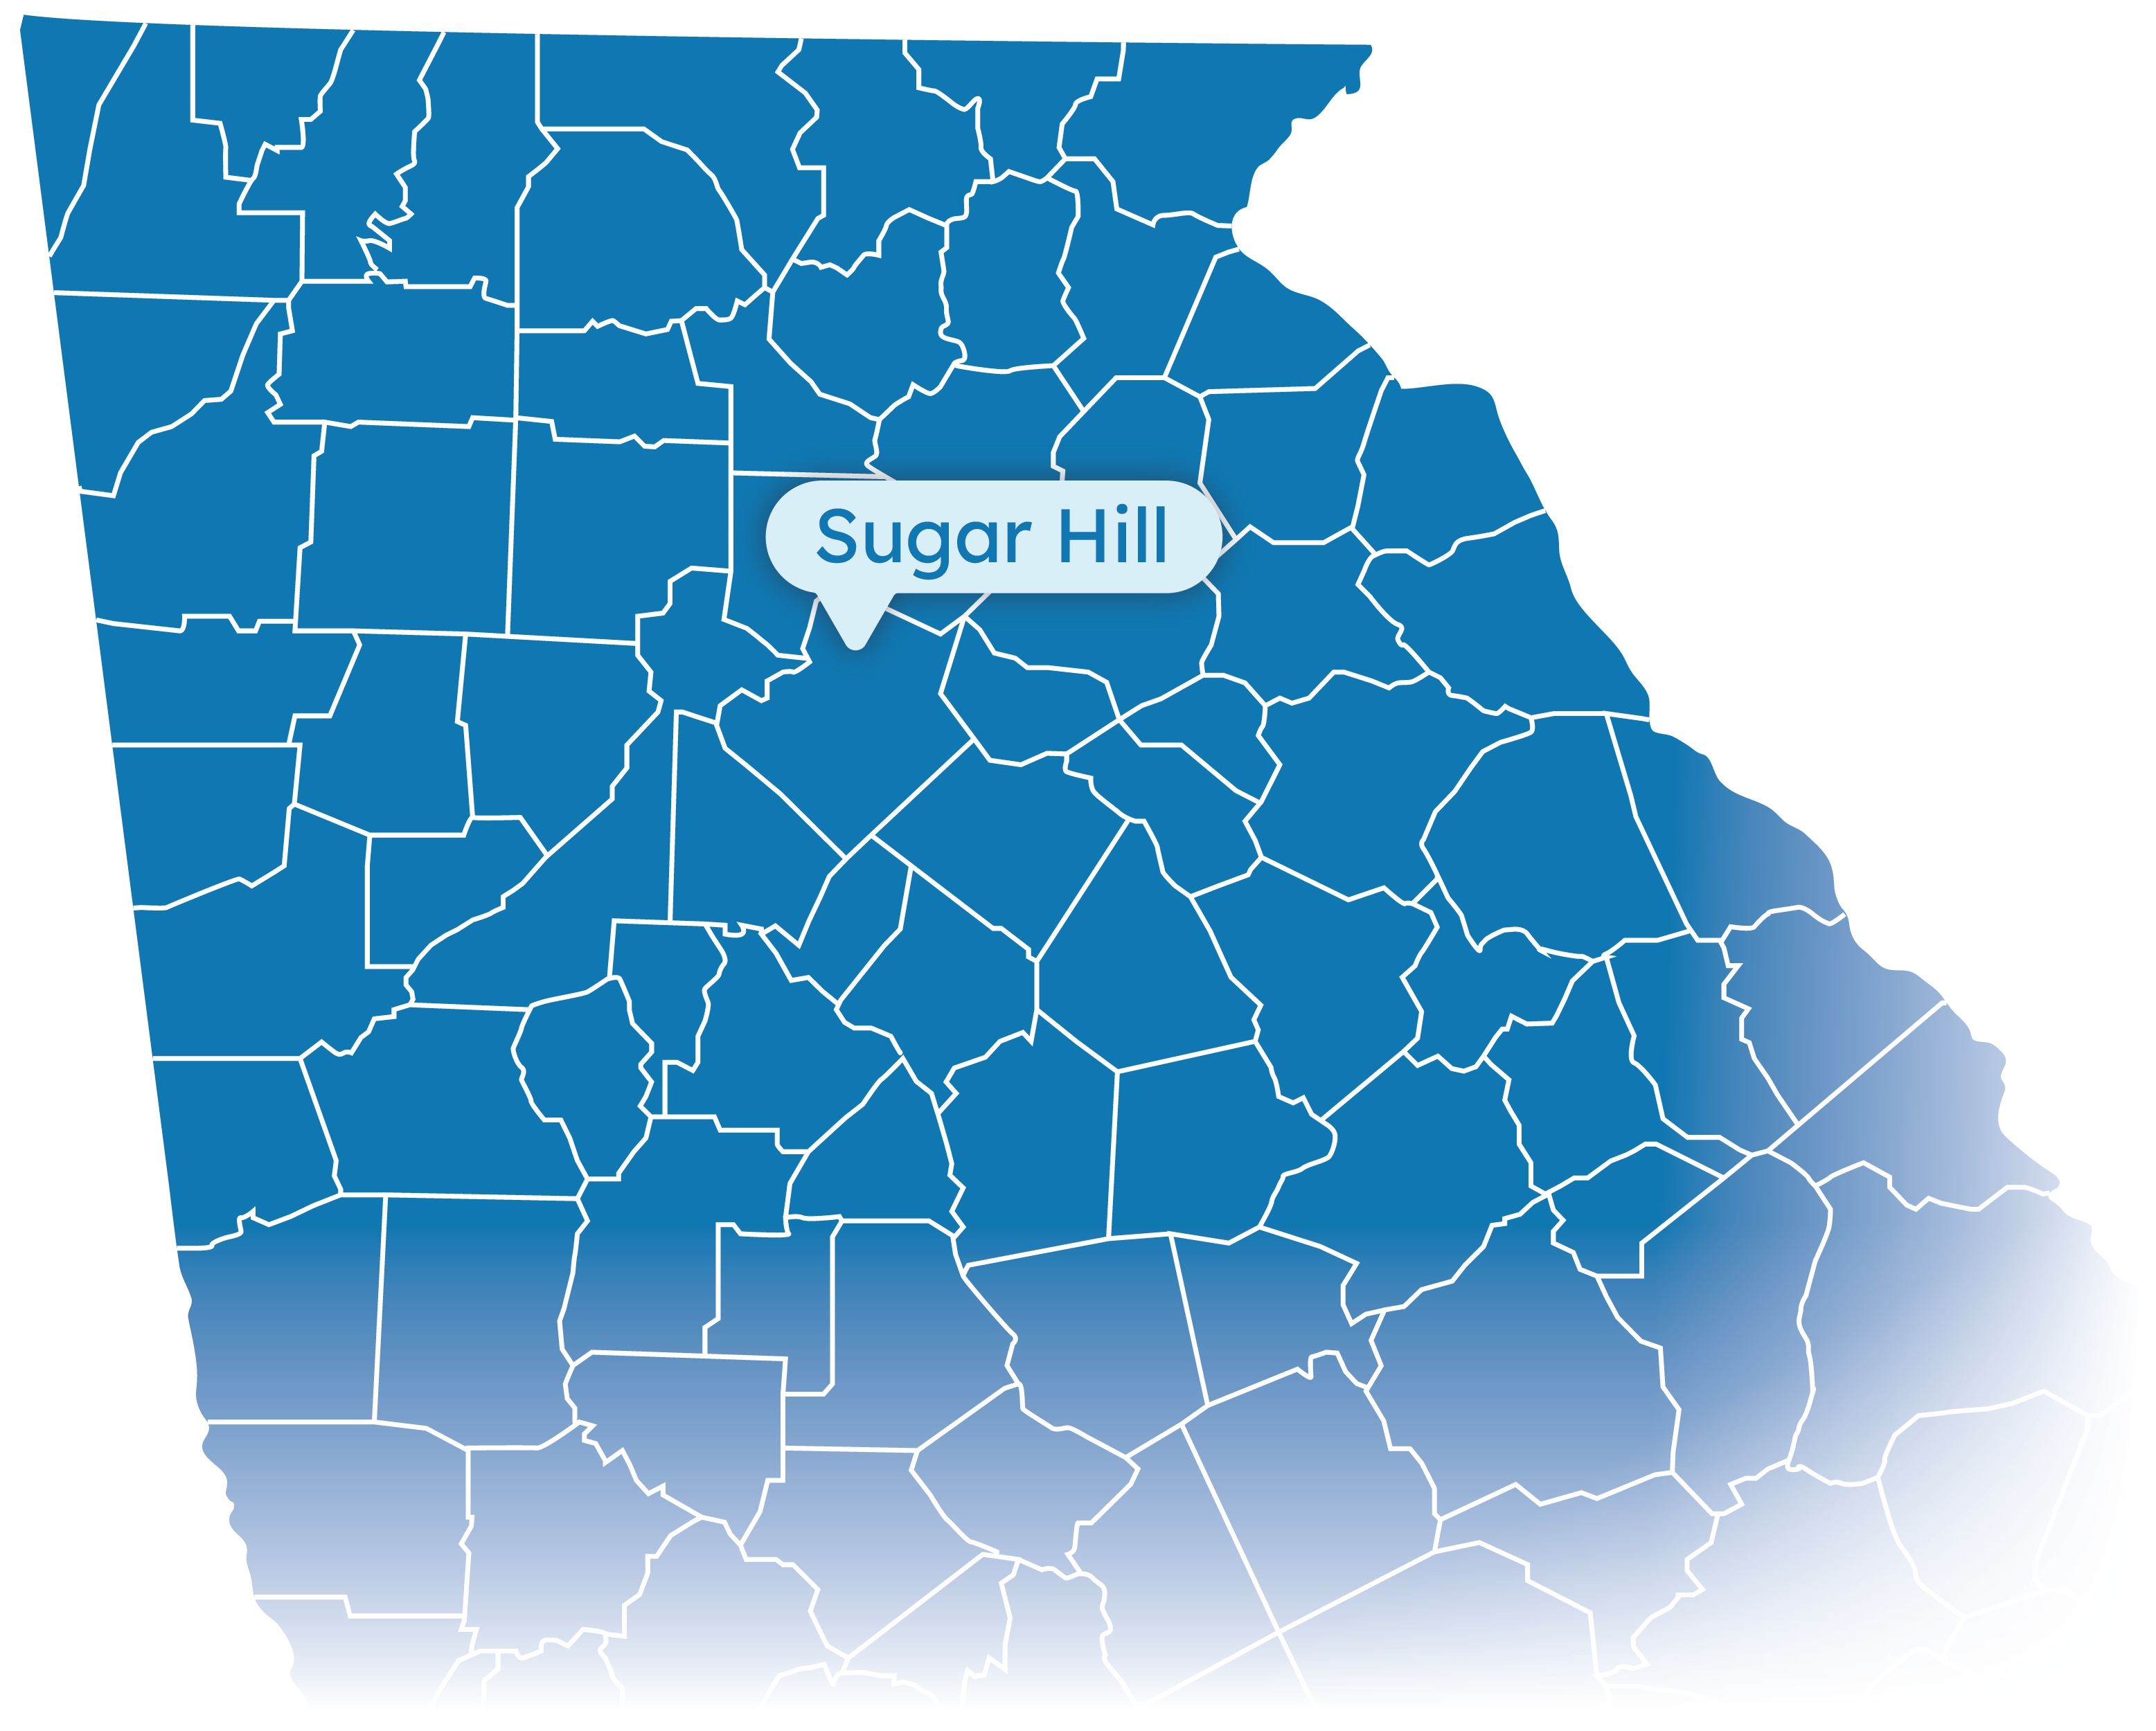 Map of Georgia with Sugar Hill highlighted